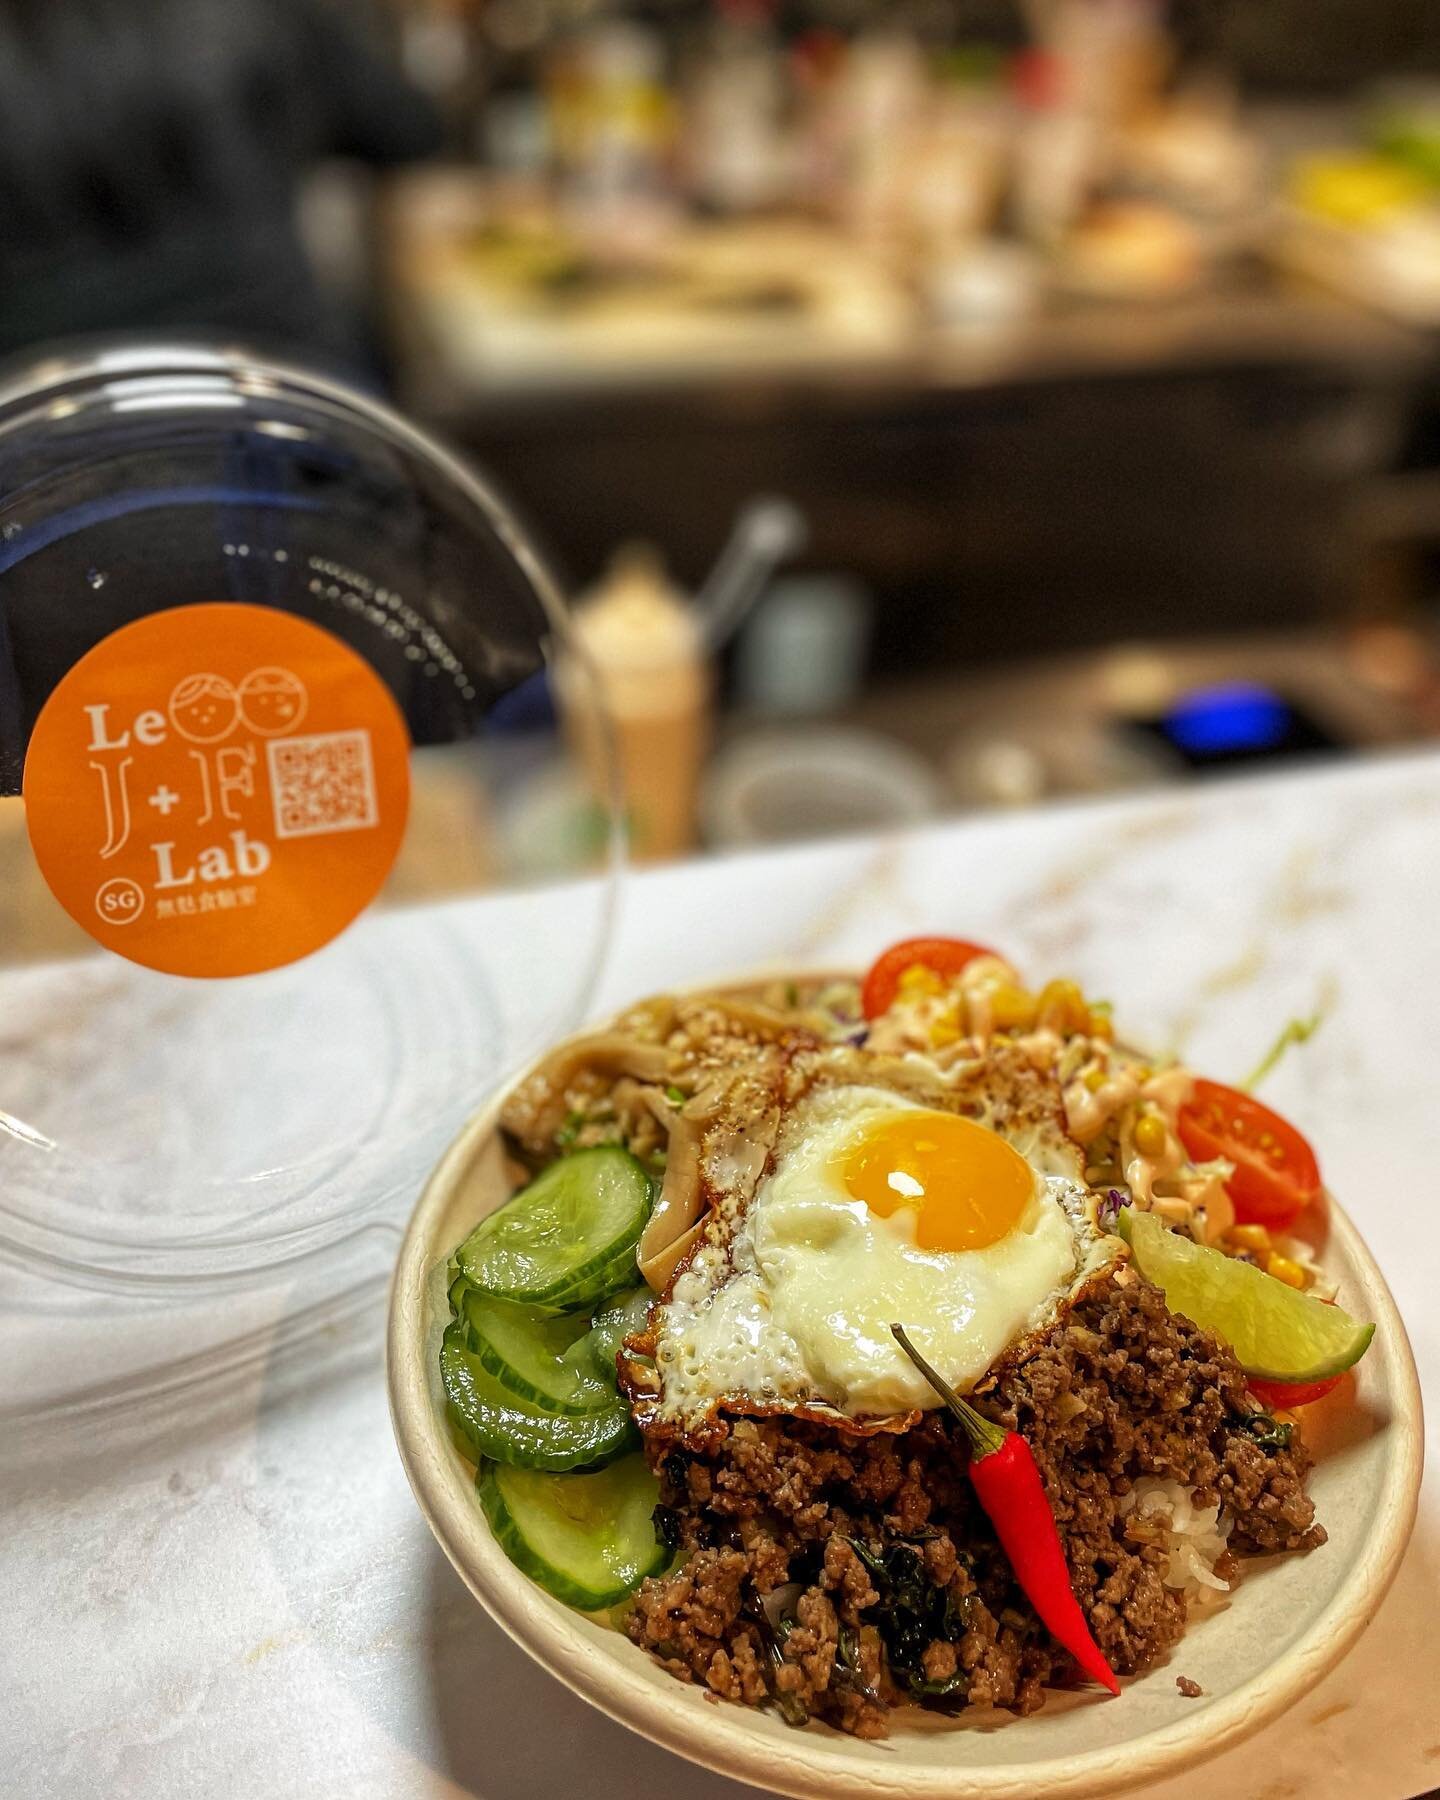 Delicious celiac friendly gluten-feee lunch today @le_jf_lab in #montreal! 

.

SO excited to see this place open up for walk-in lunch now - and what a lovely surprise to meet @jeanlifefoodlovestory!

.

I came upon this place last time we were at @k